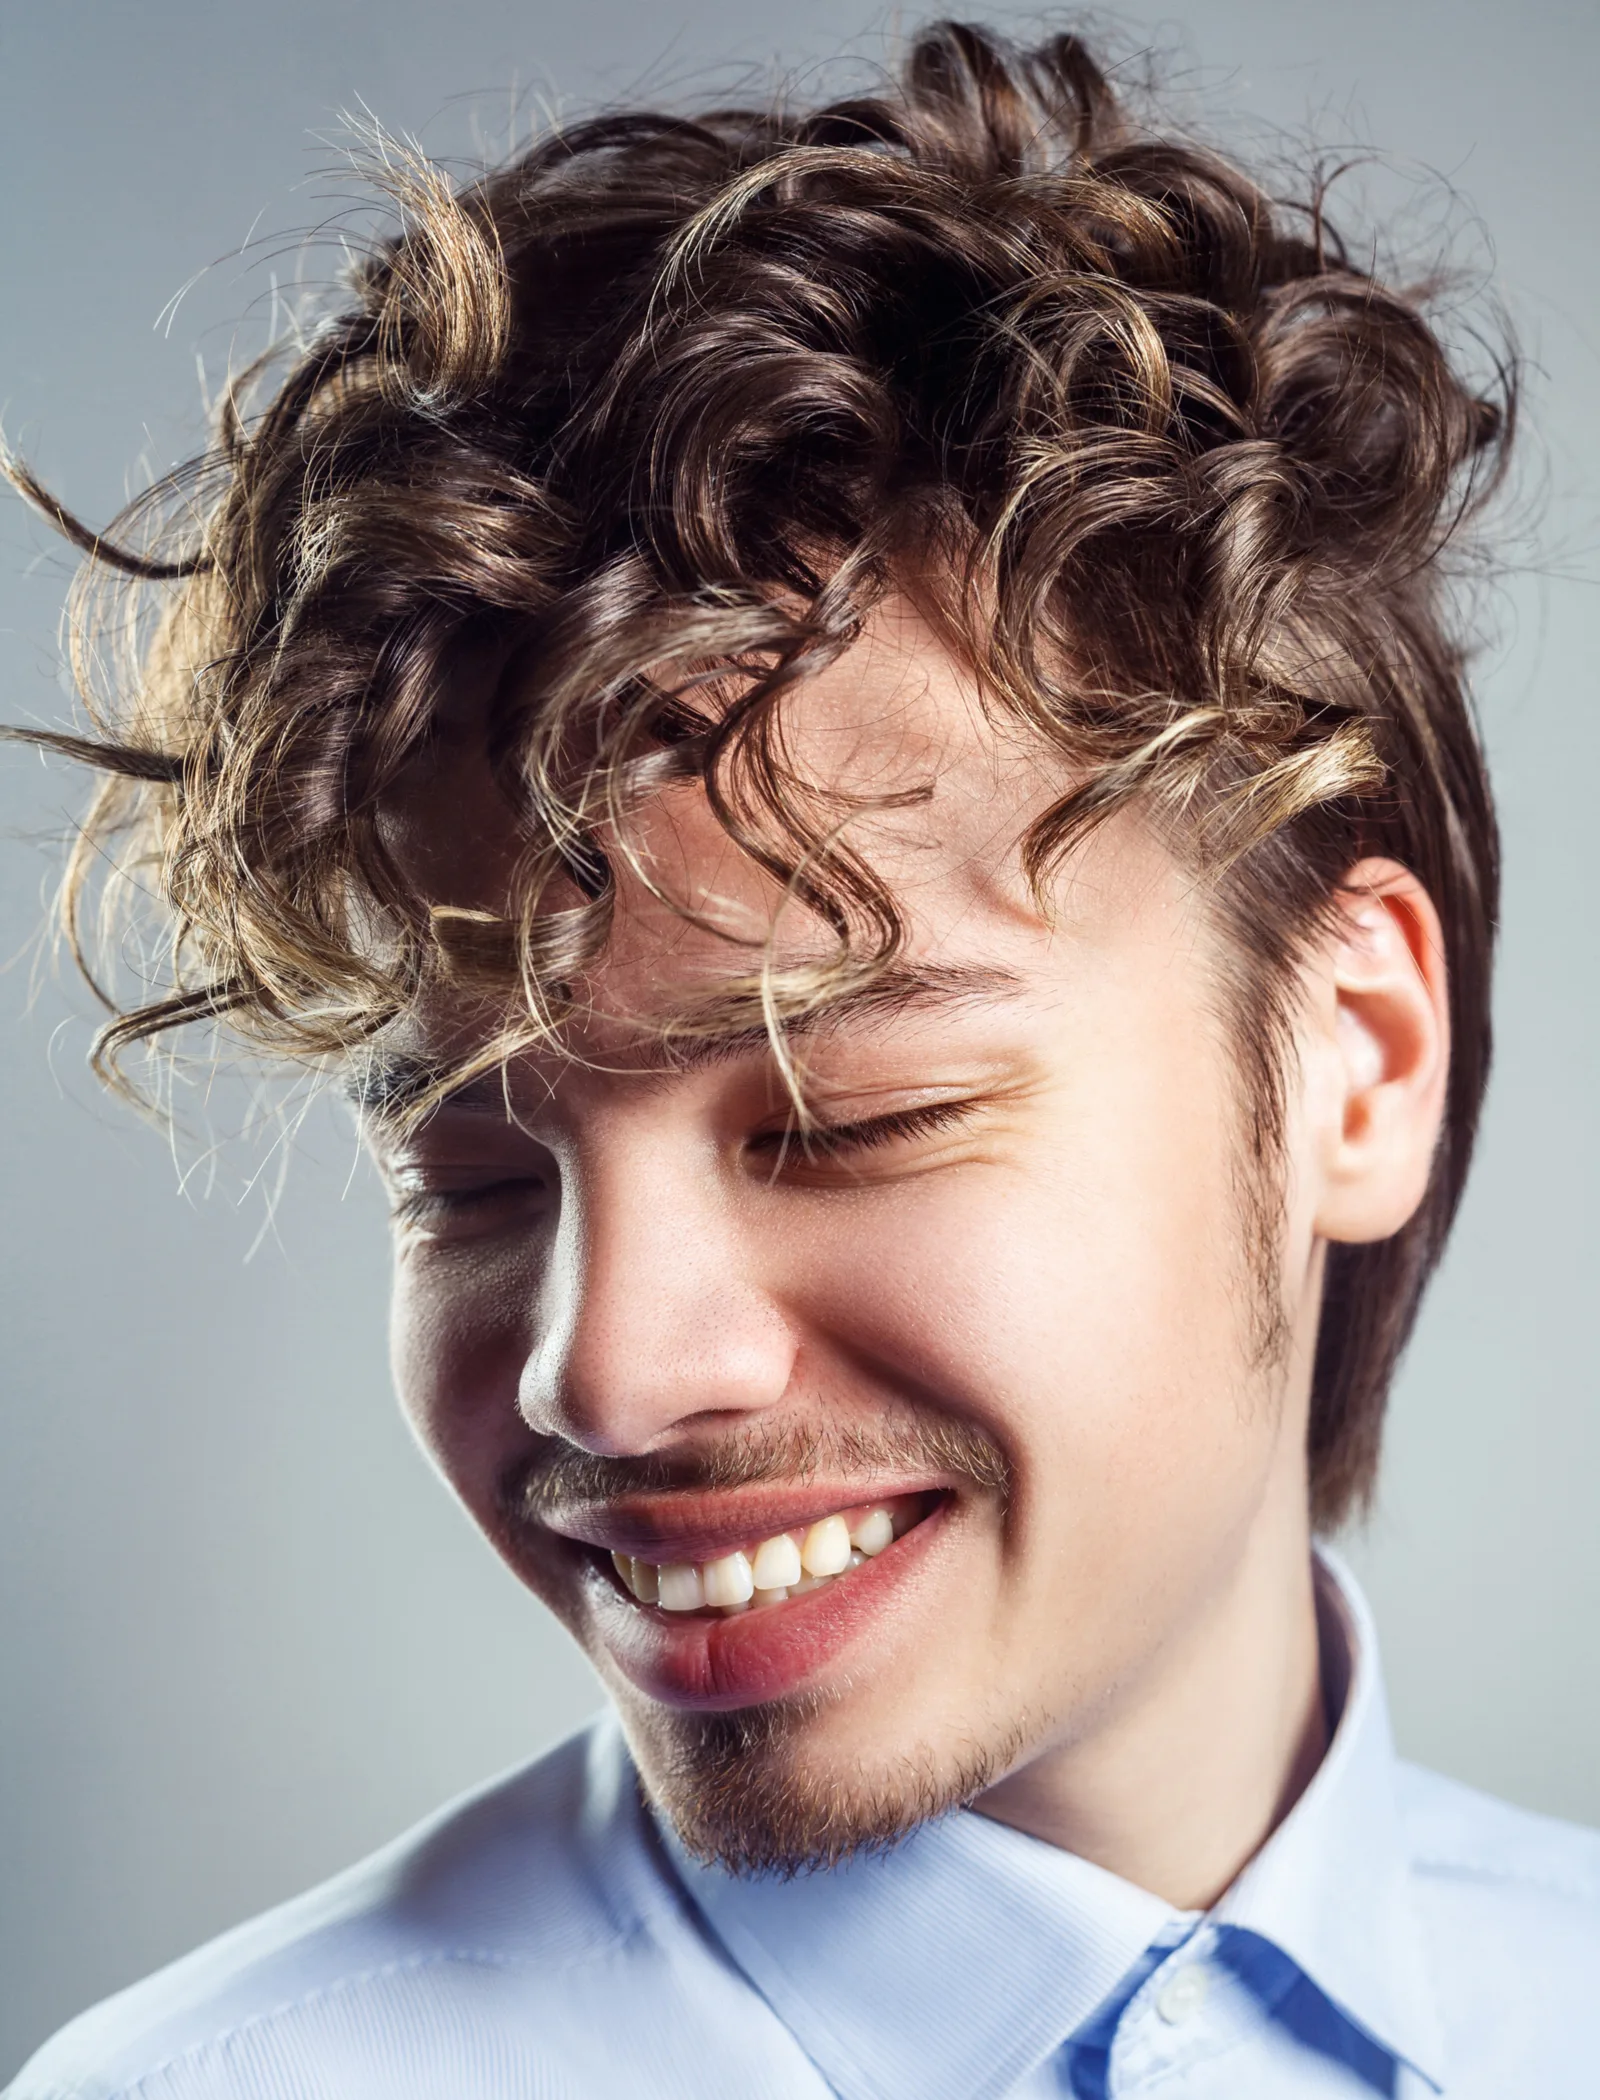 Face-Framing Blonde Highlights on a Curly Dark Haired Male